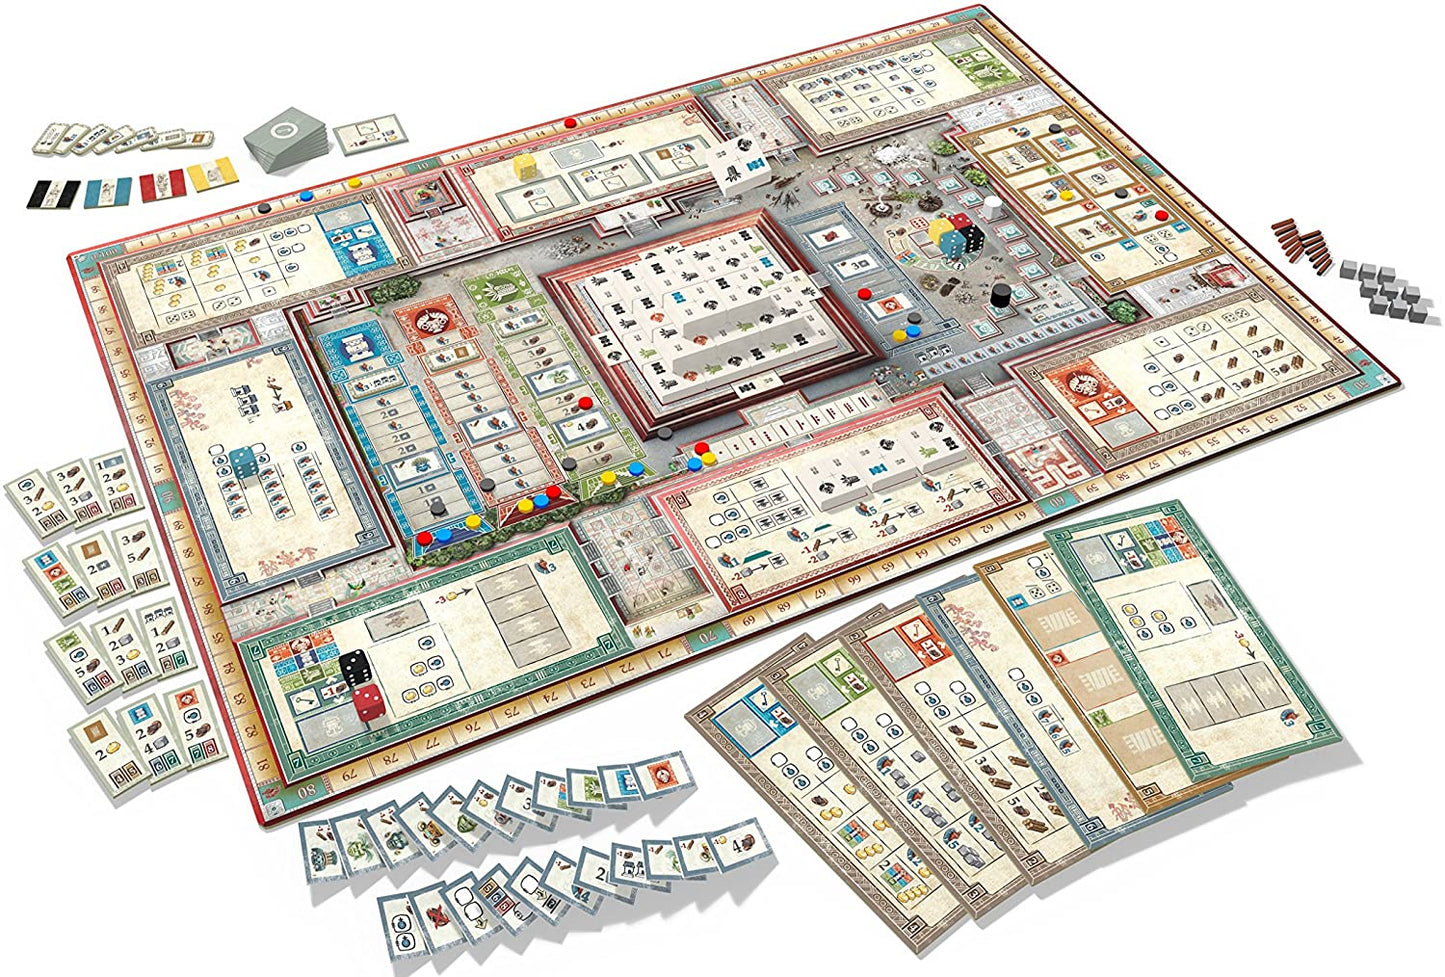 Teotihuacan: City of Gods Board & Dice